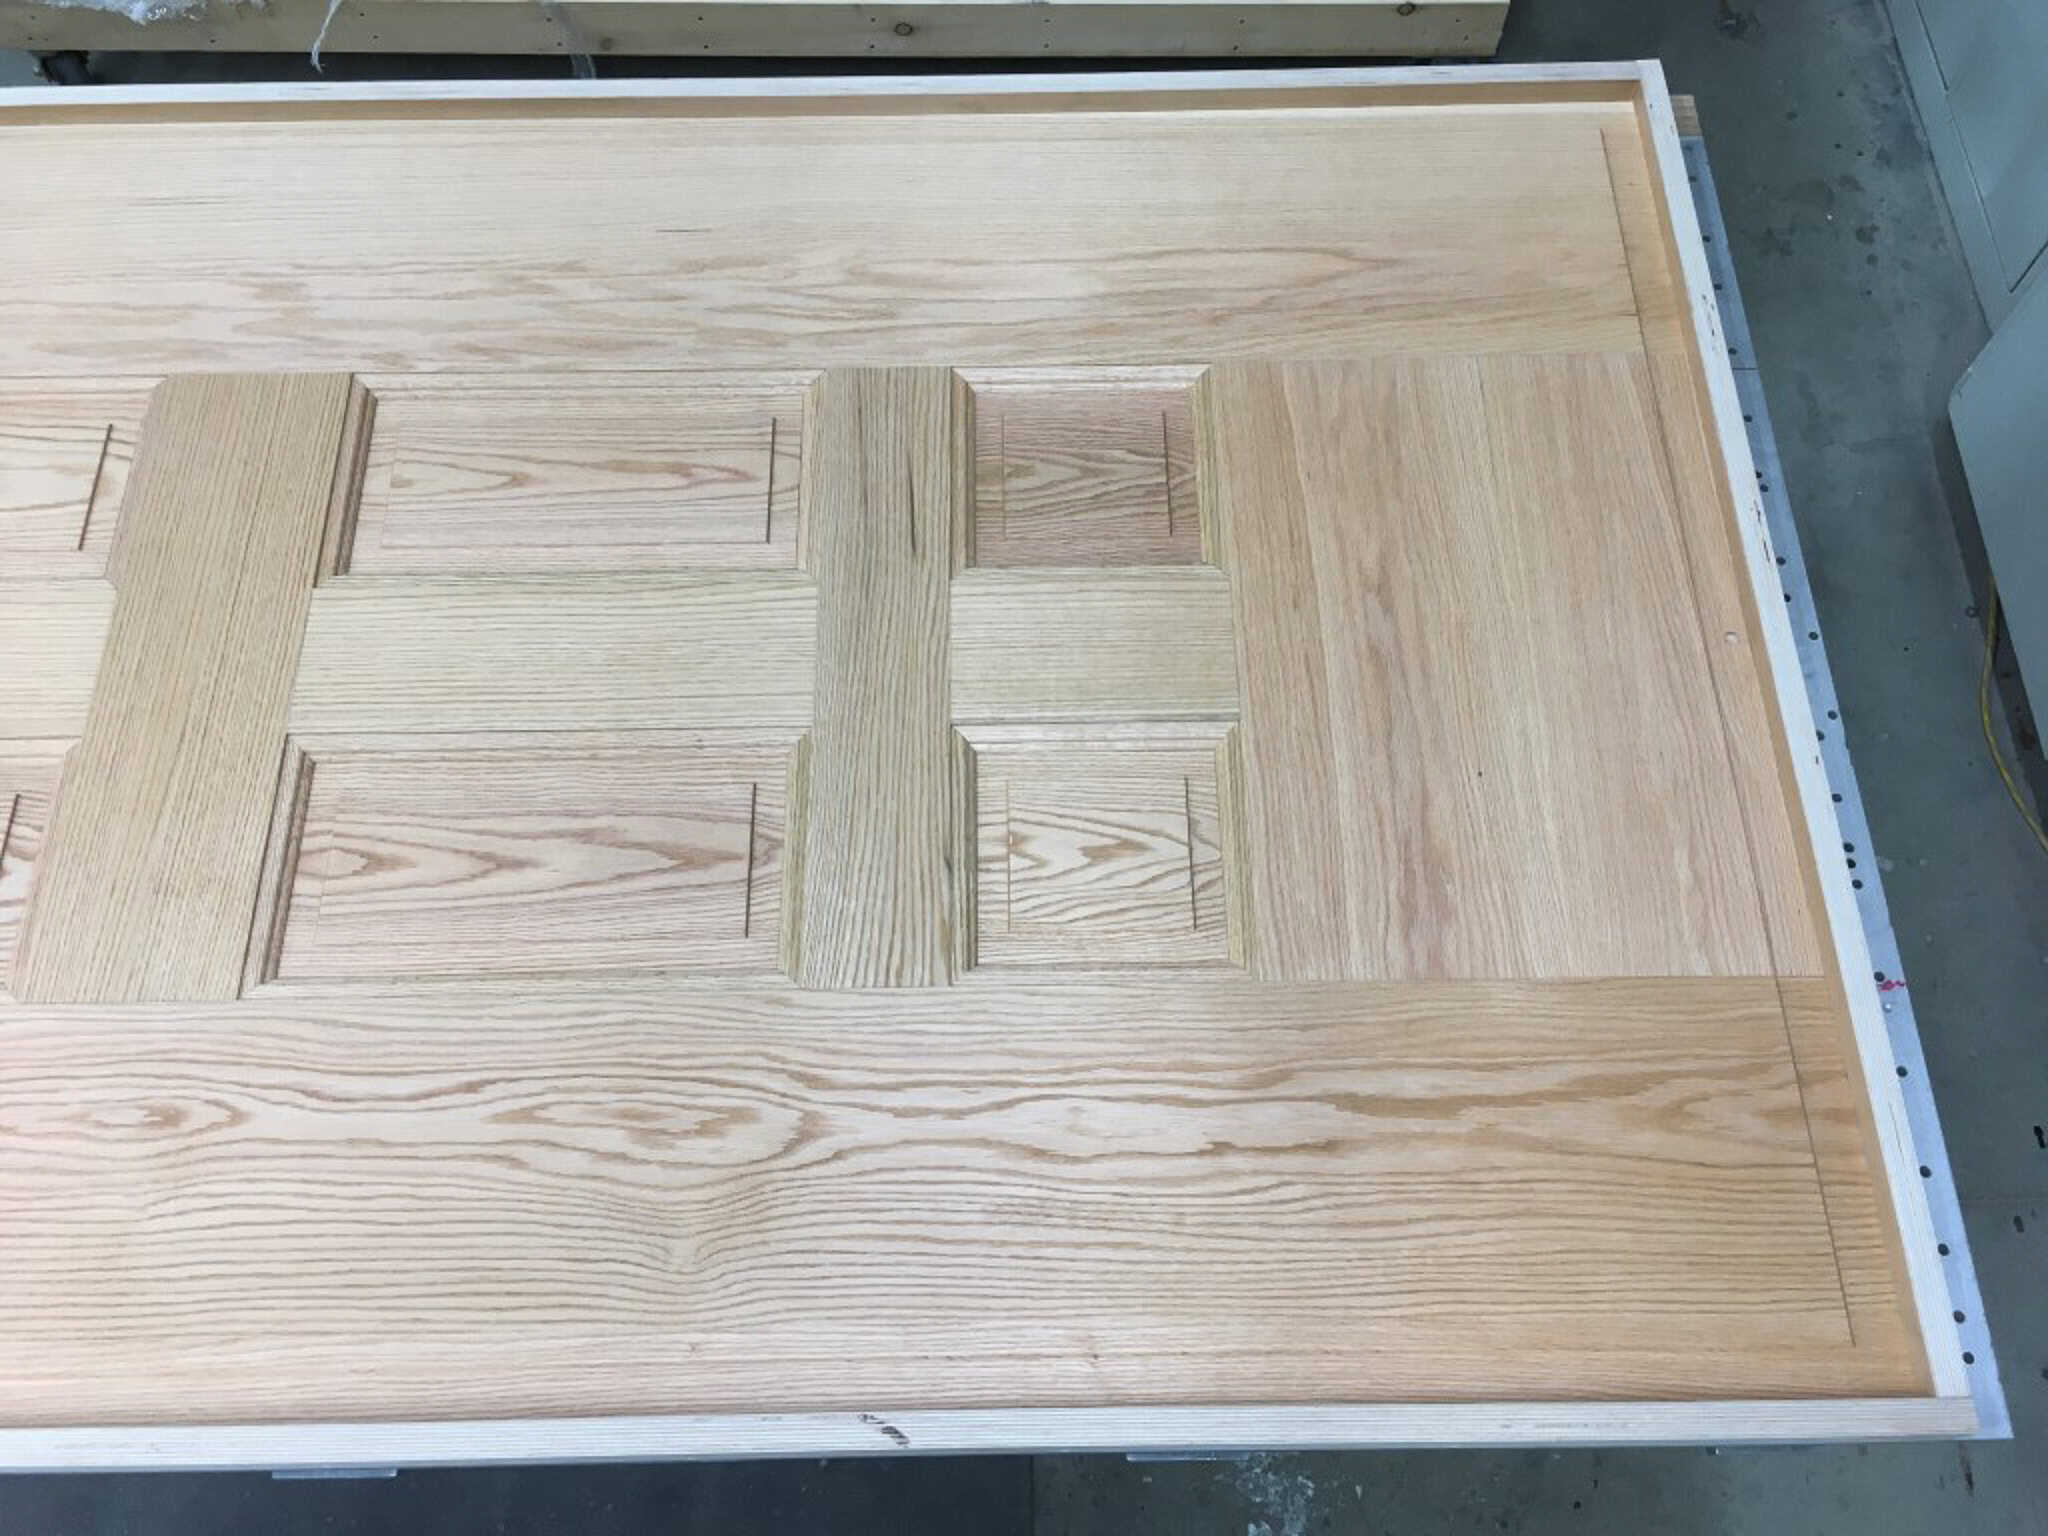 Unfinished rustic wood grain commercial door with a detailed panel design laid out on a workshop table.